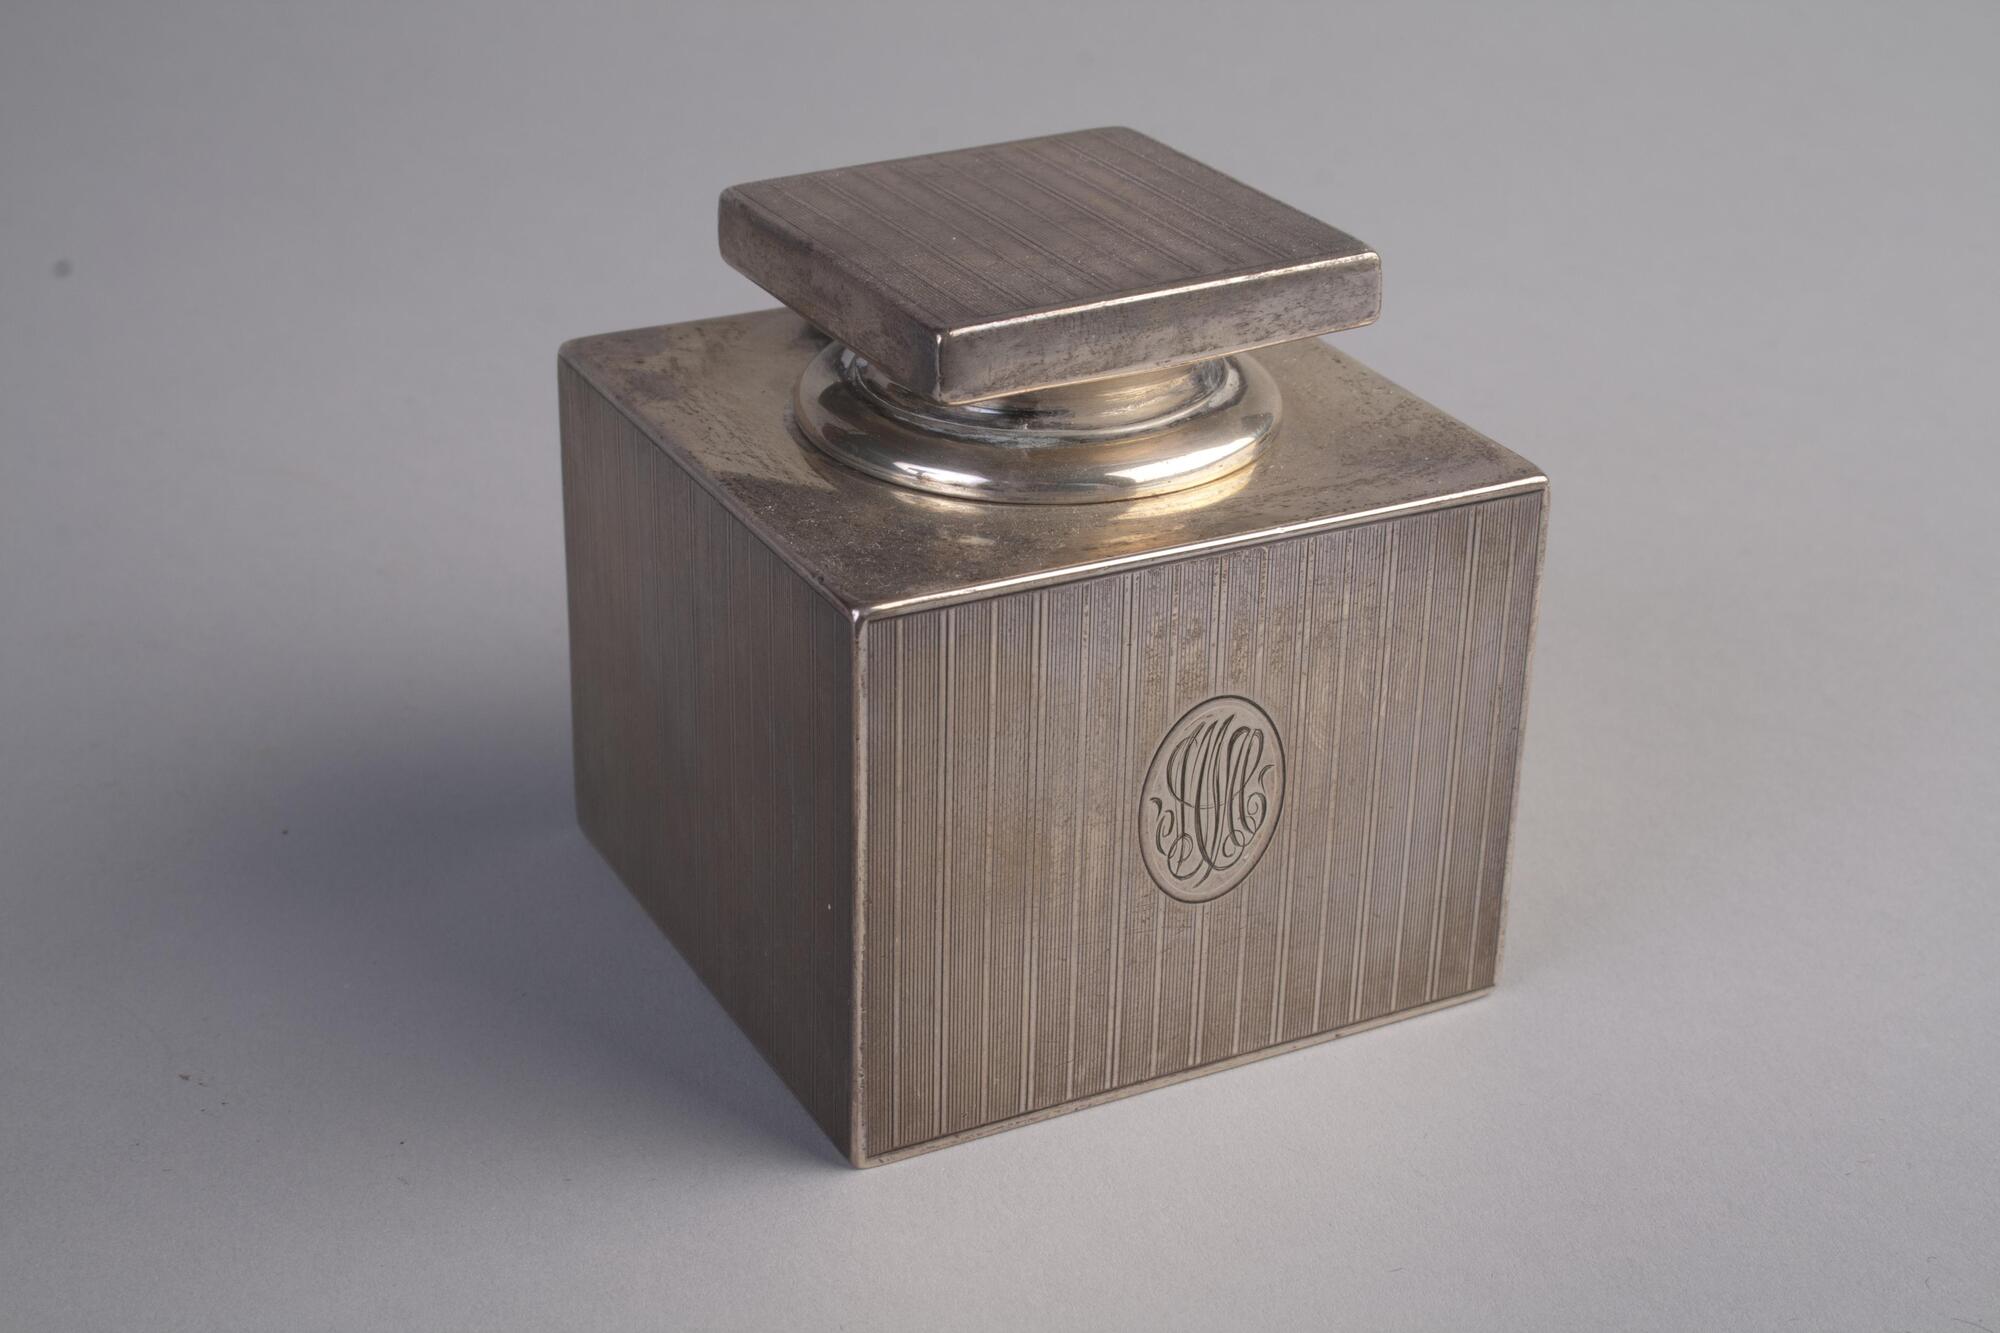 A square, sterling silver inkwell. The base is monogrammed and has etched lines. The lid is flat, square, and also has etched lines.